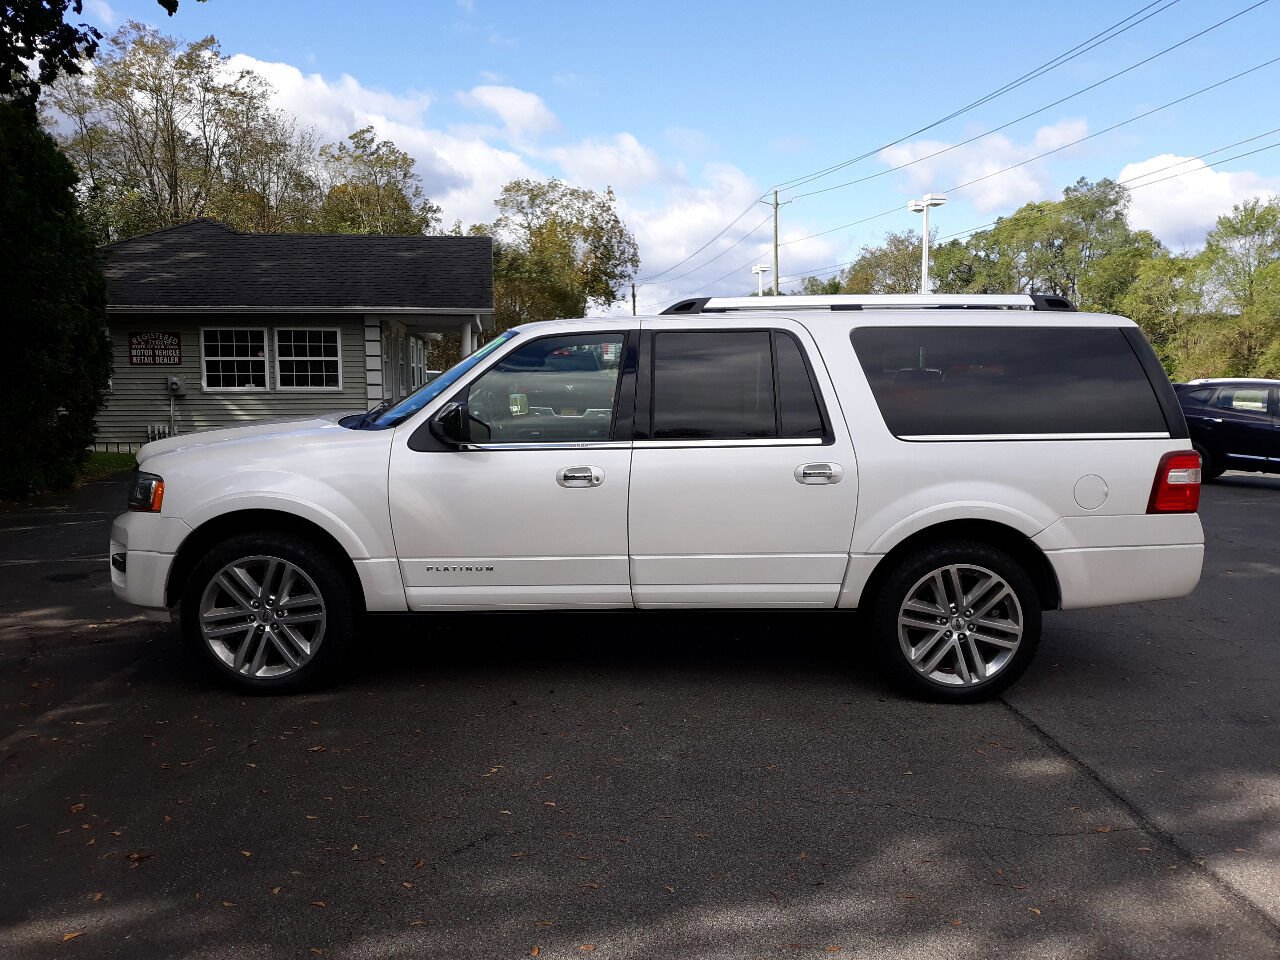 Used 2017 Ford Expedition EL for Sale Near Me in Elmira, NY - Autotrader